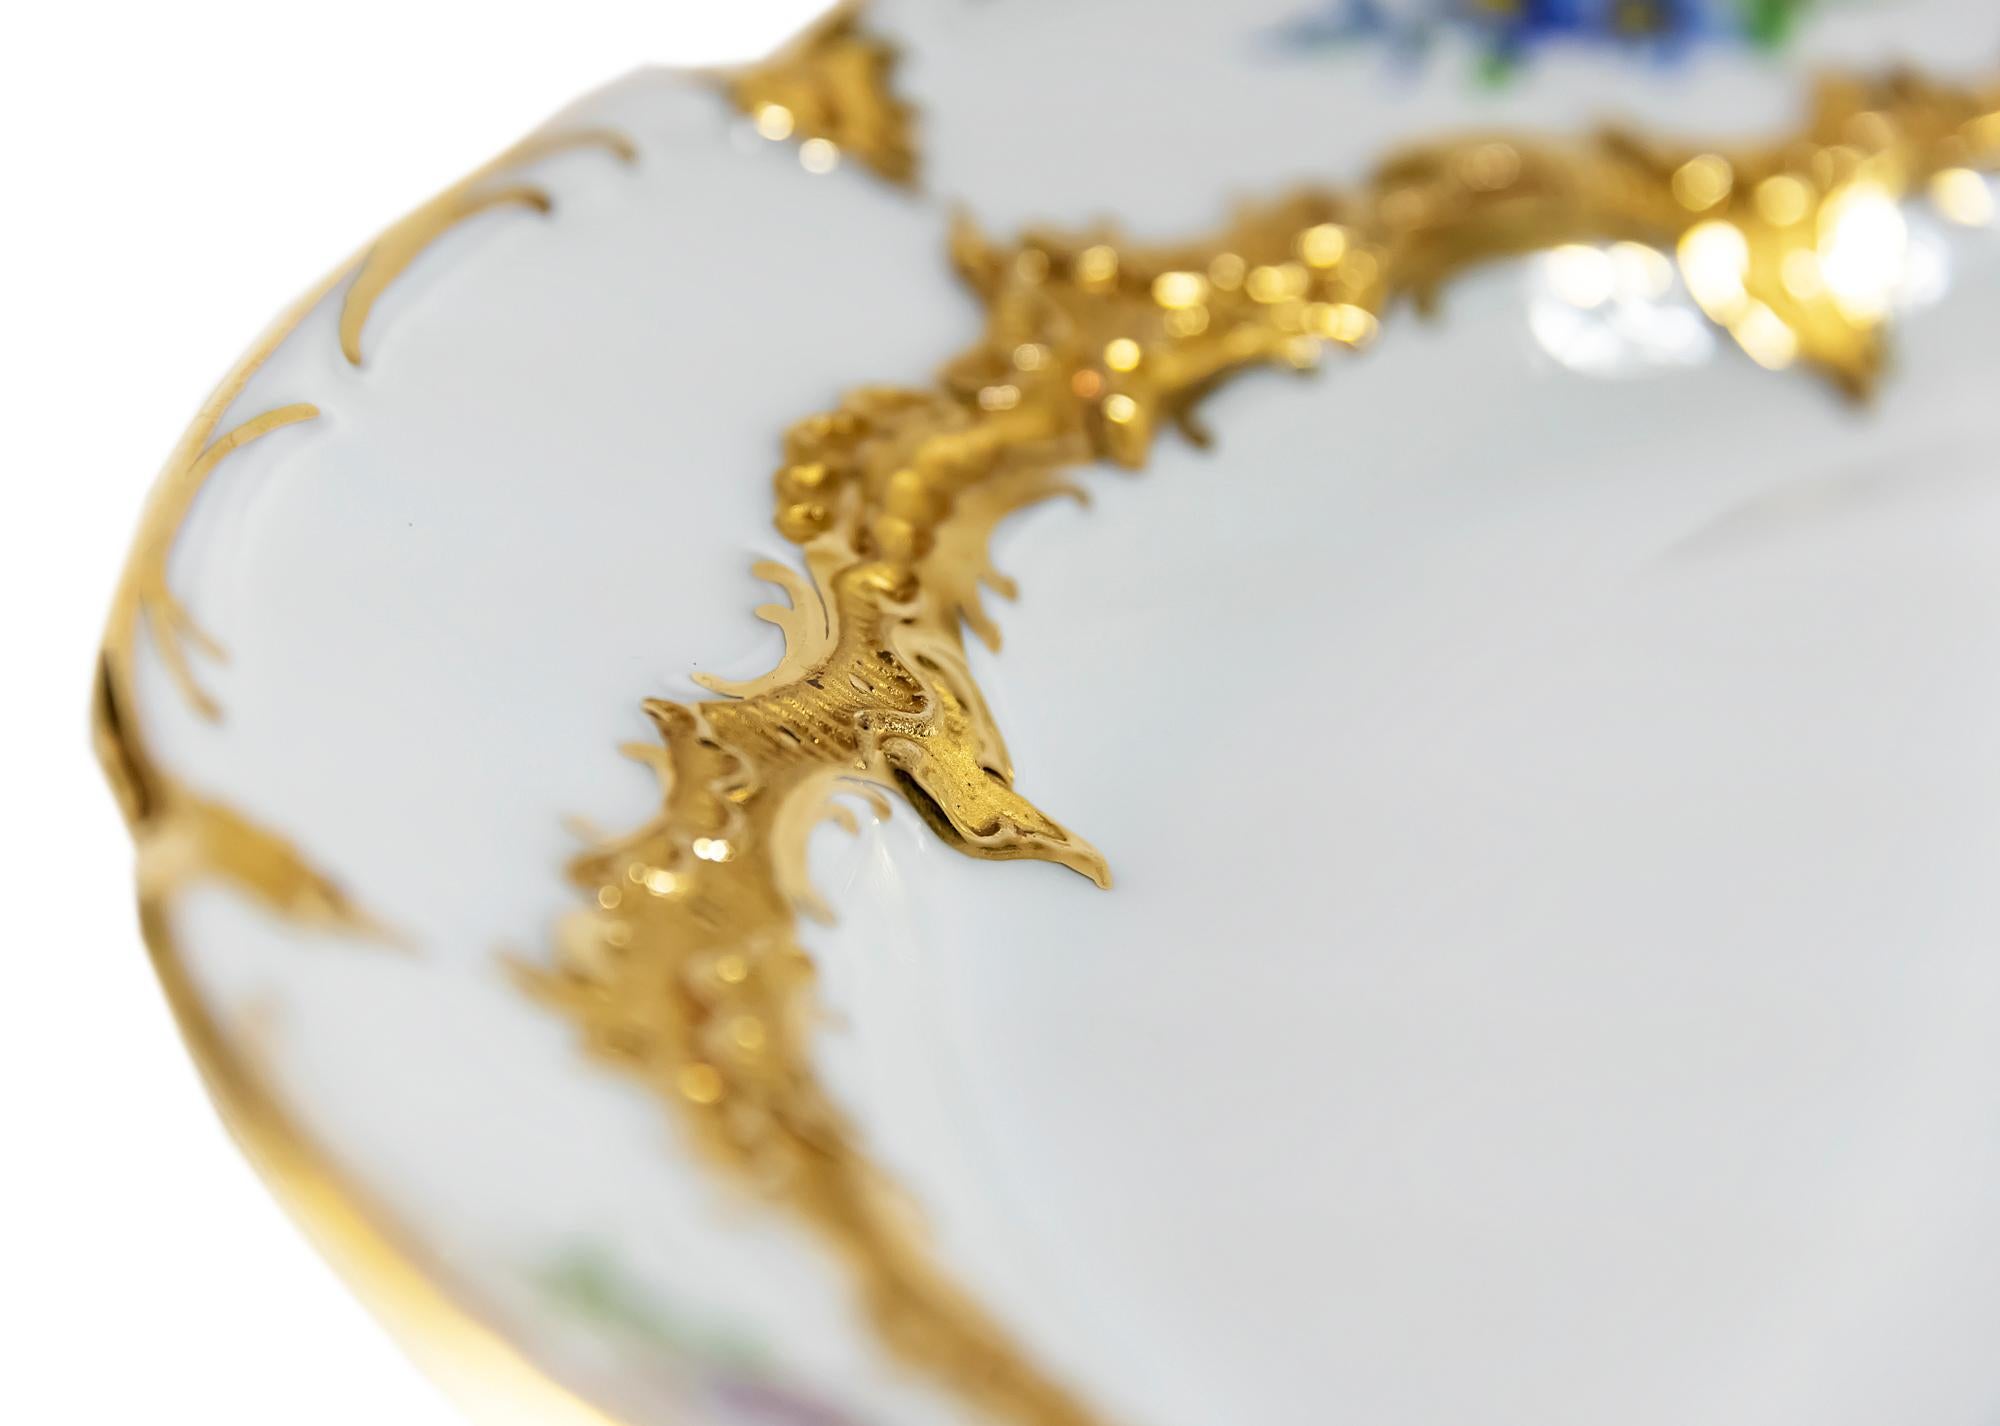 Hand-Painted Meissen Hand Painted Porcelain Plate